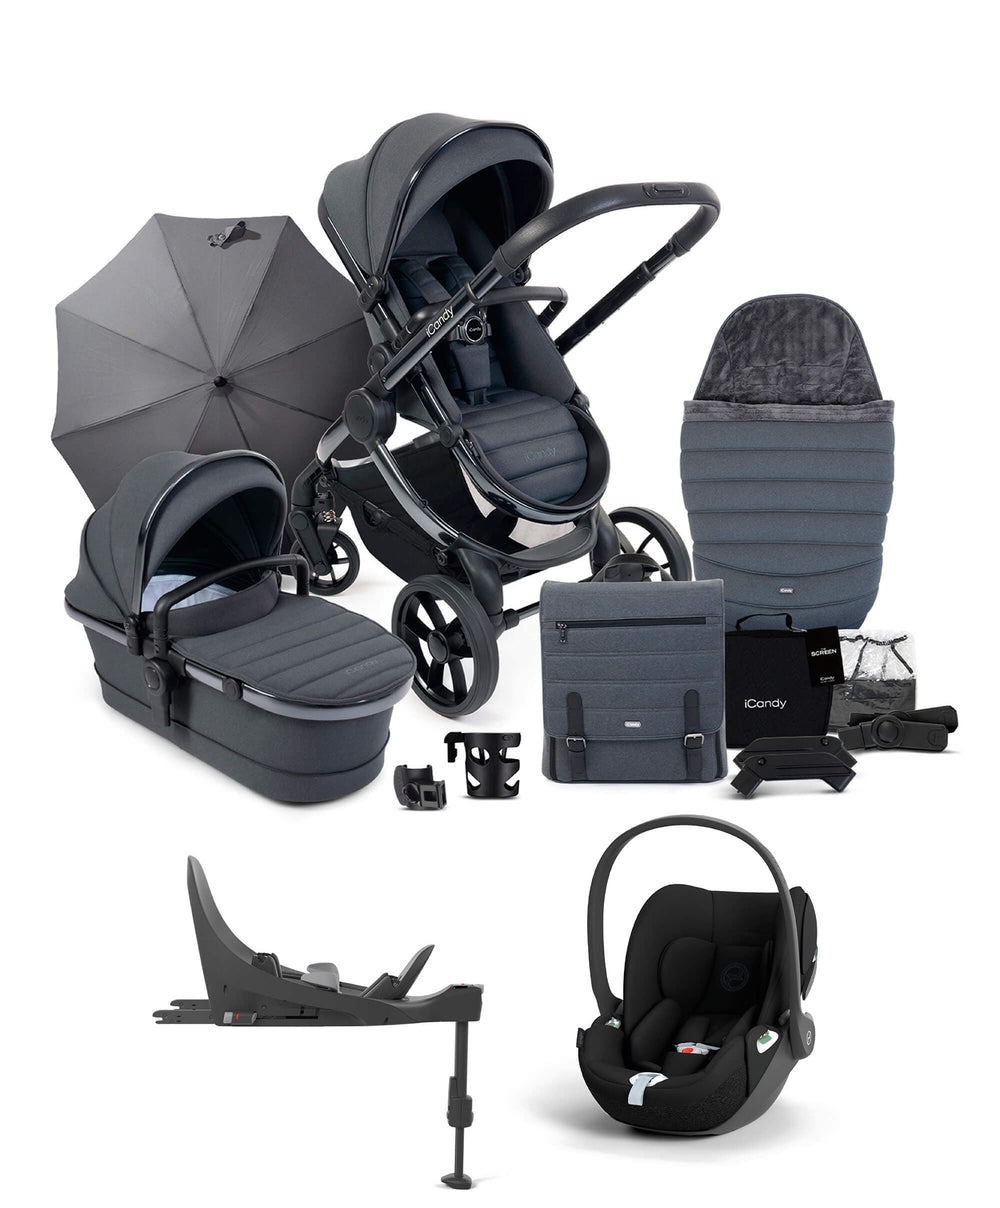 iCandy Pushchairs iCandy Peach 7 Pushchair Bundle with Cloud T Car Seat and Base in Dark Grey